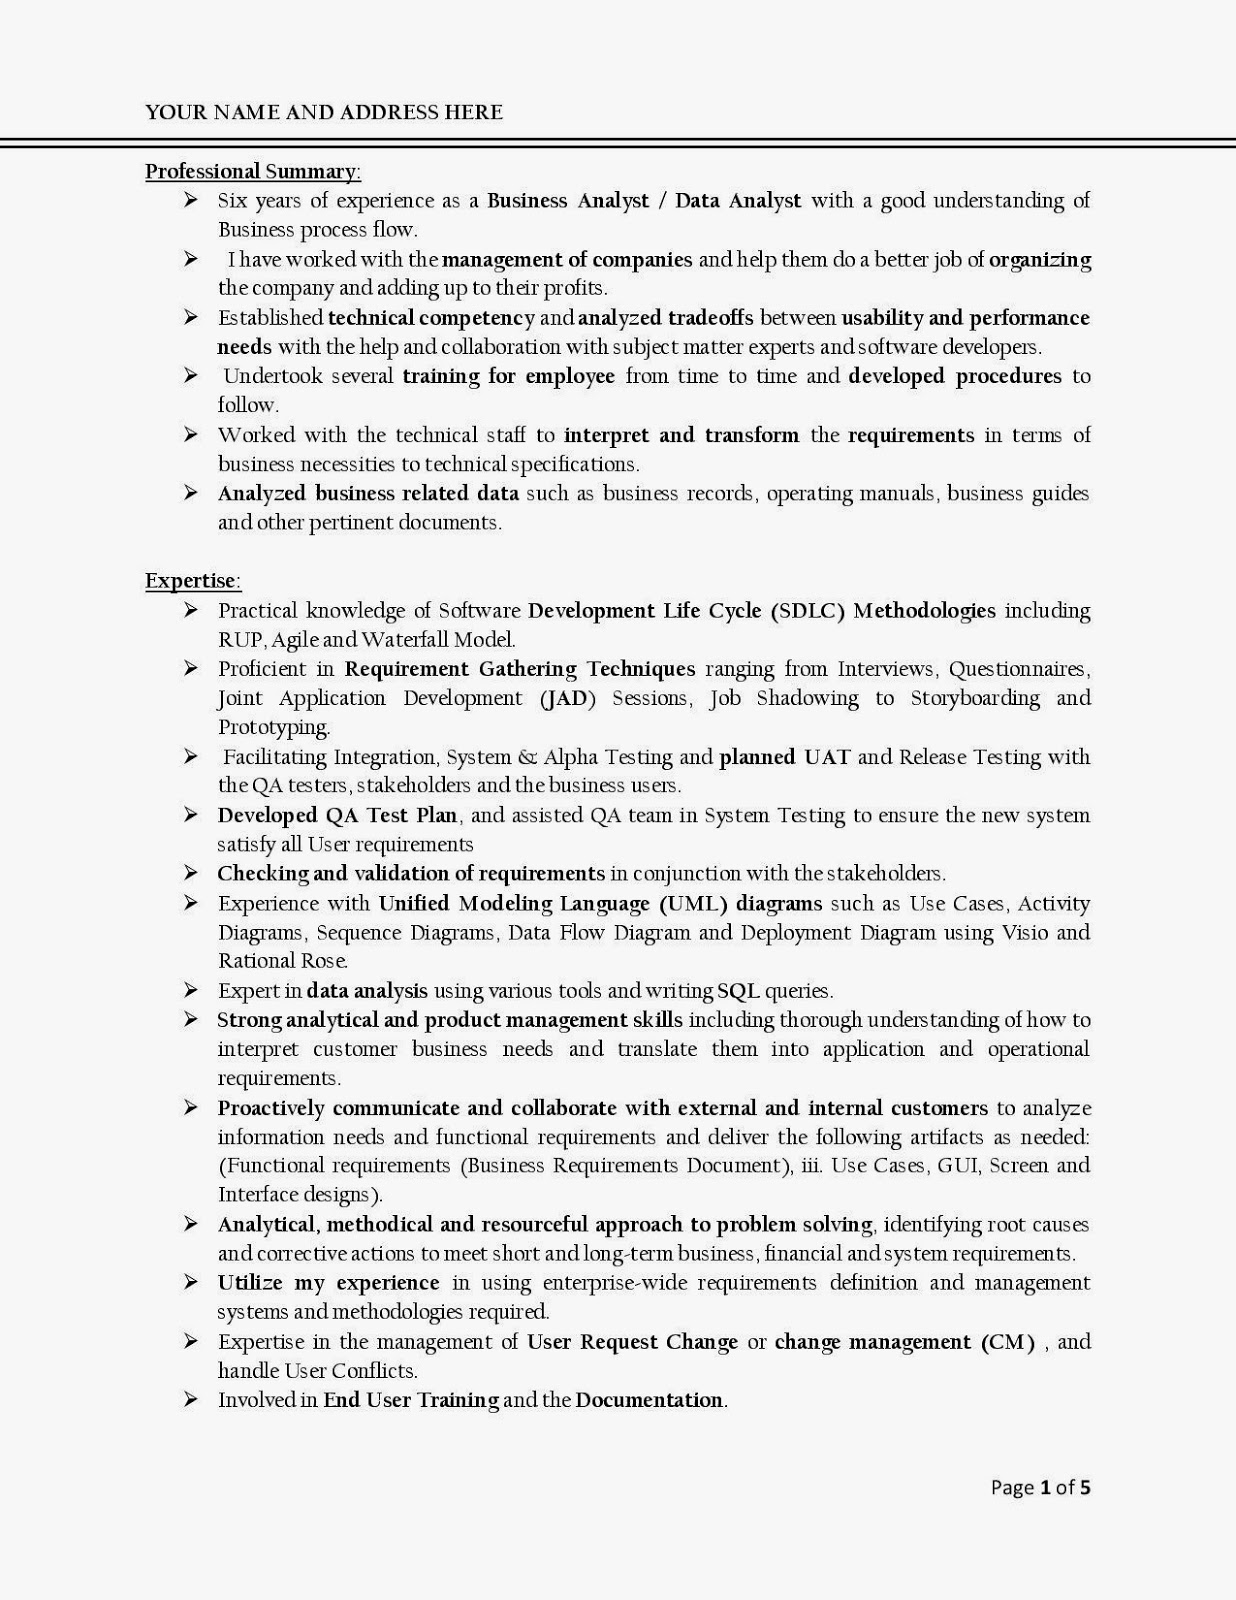 H1B Job Description With Duties And Percentages Sample Template